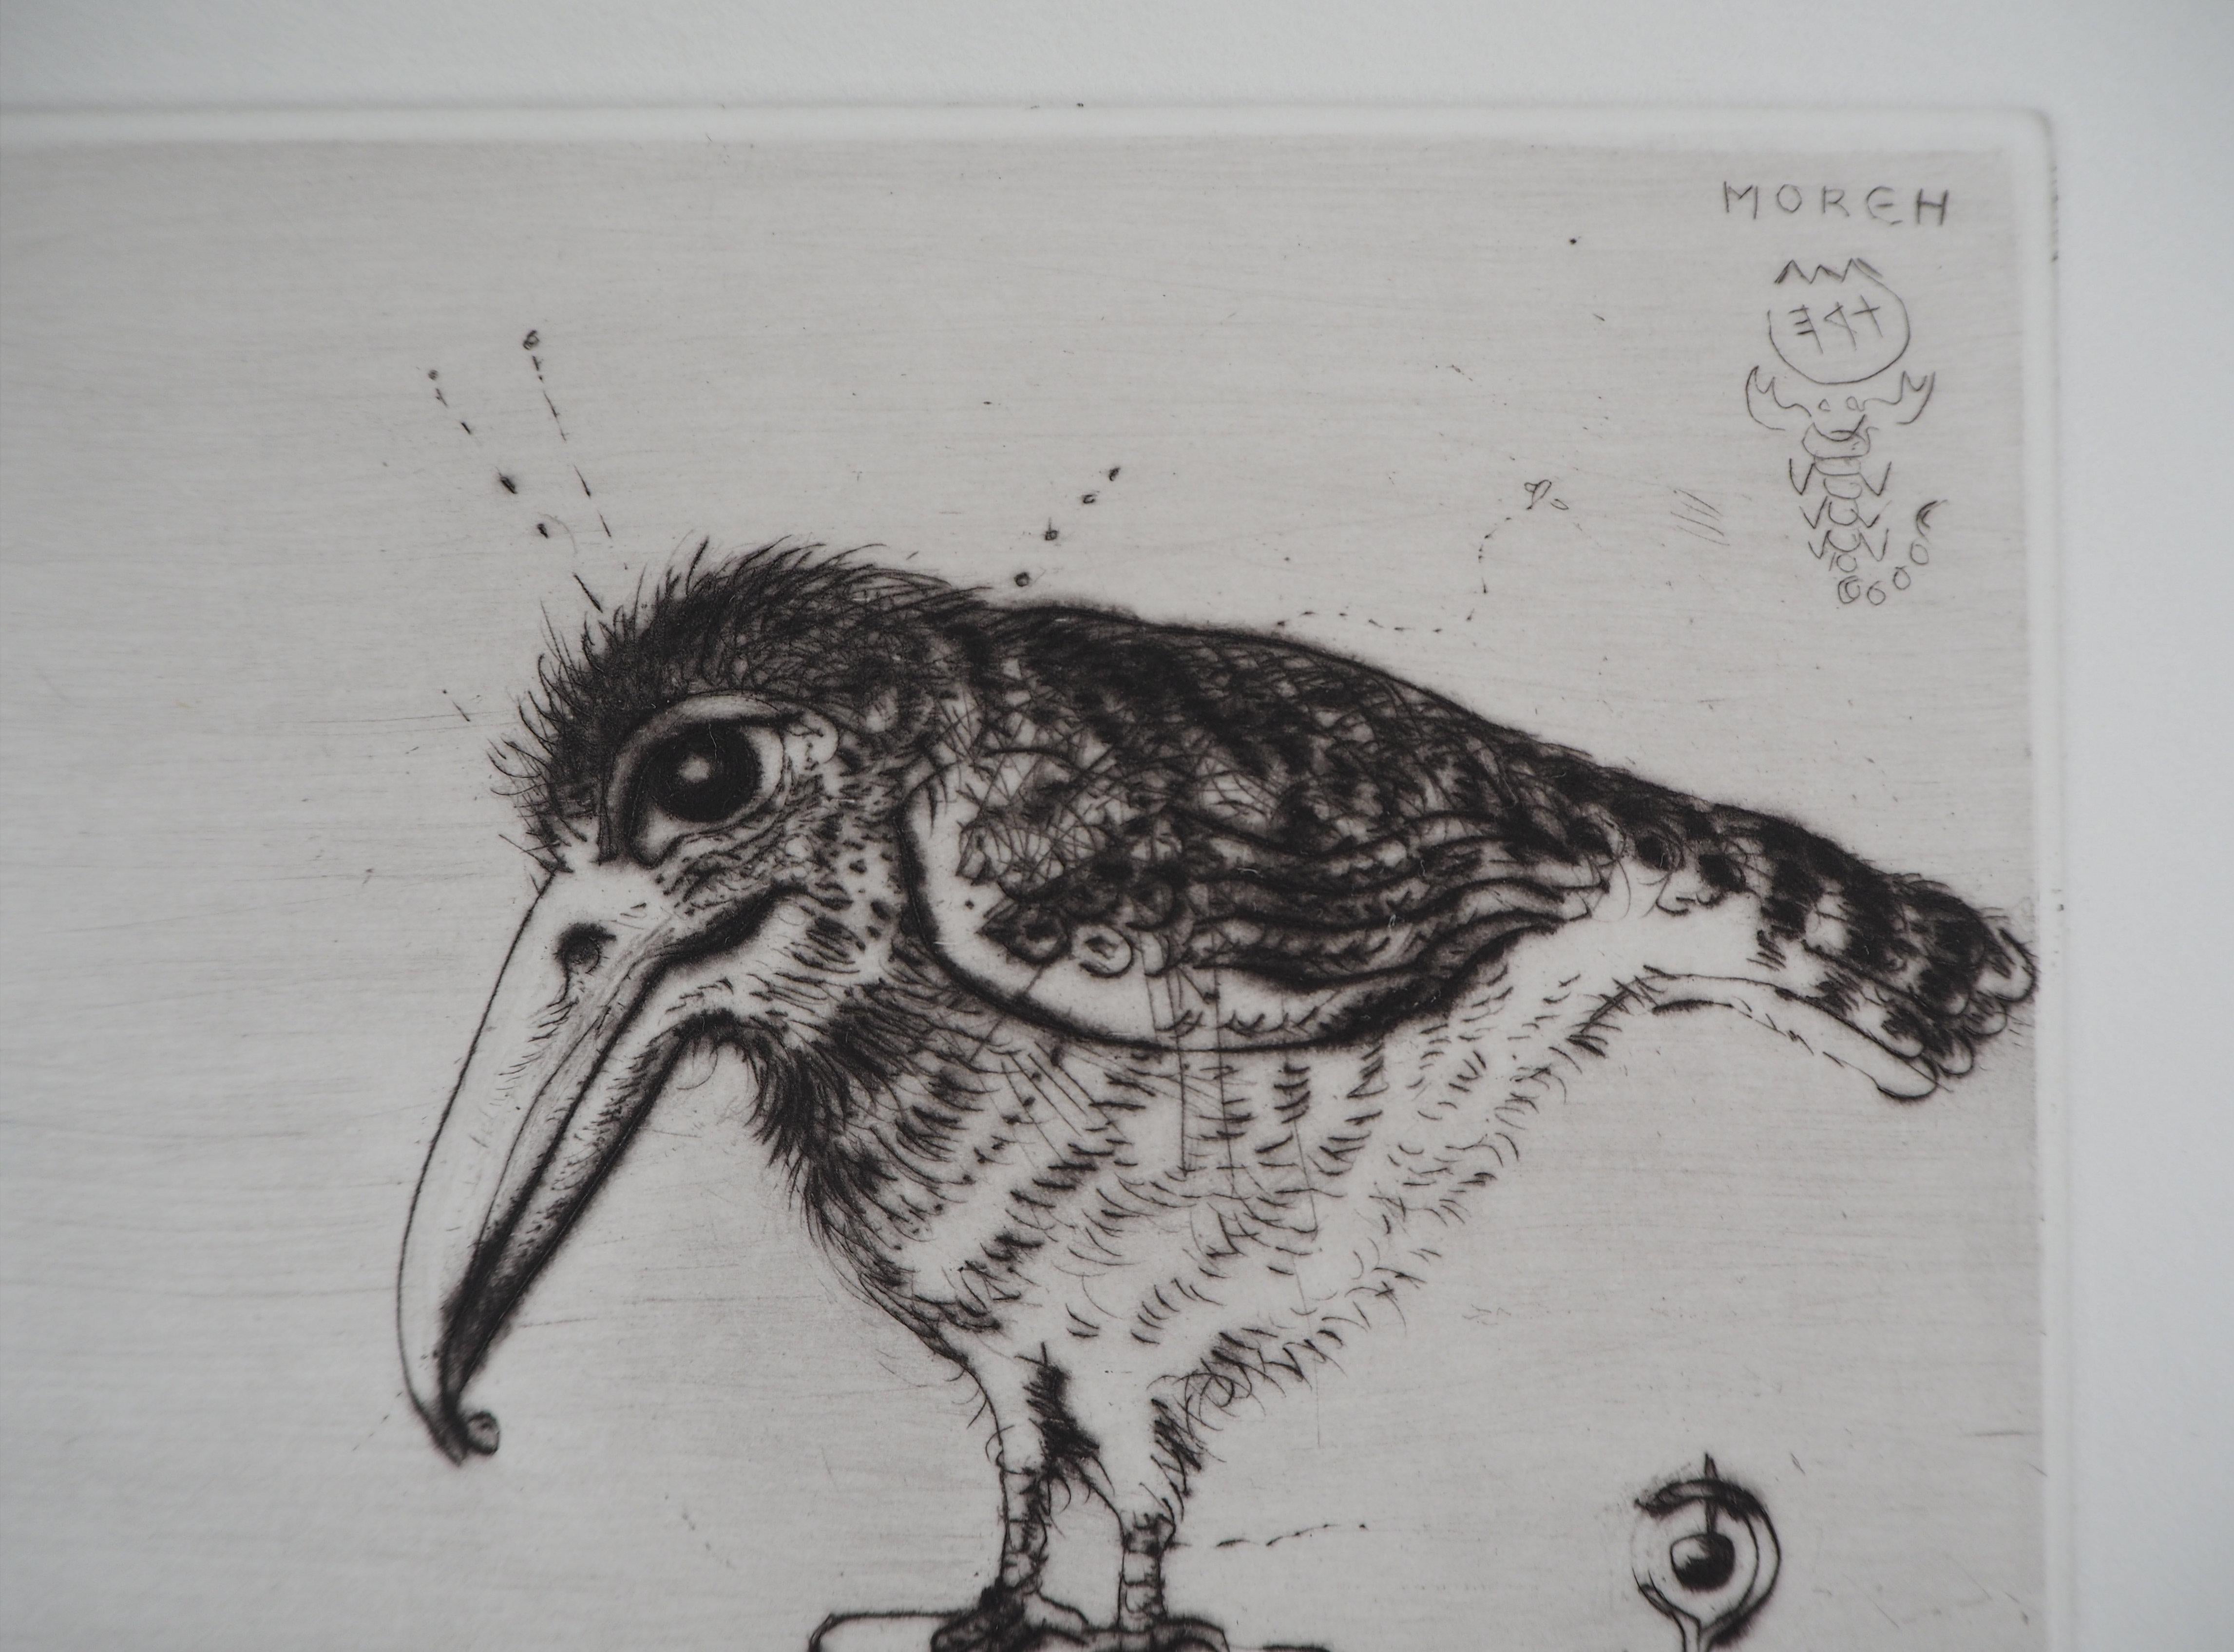 Mordecaï Moreh (1937-)
The Little Bird

Original handsigned etching 
Numbered / 75 copies - numbered in roman numerals (the number of the etching you receive might differ from the one in the photo)
On vellum BFK Rives 20.5 x 19 cm (c. 7.8 x 7.4